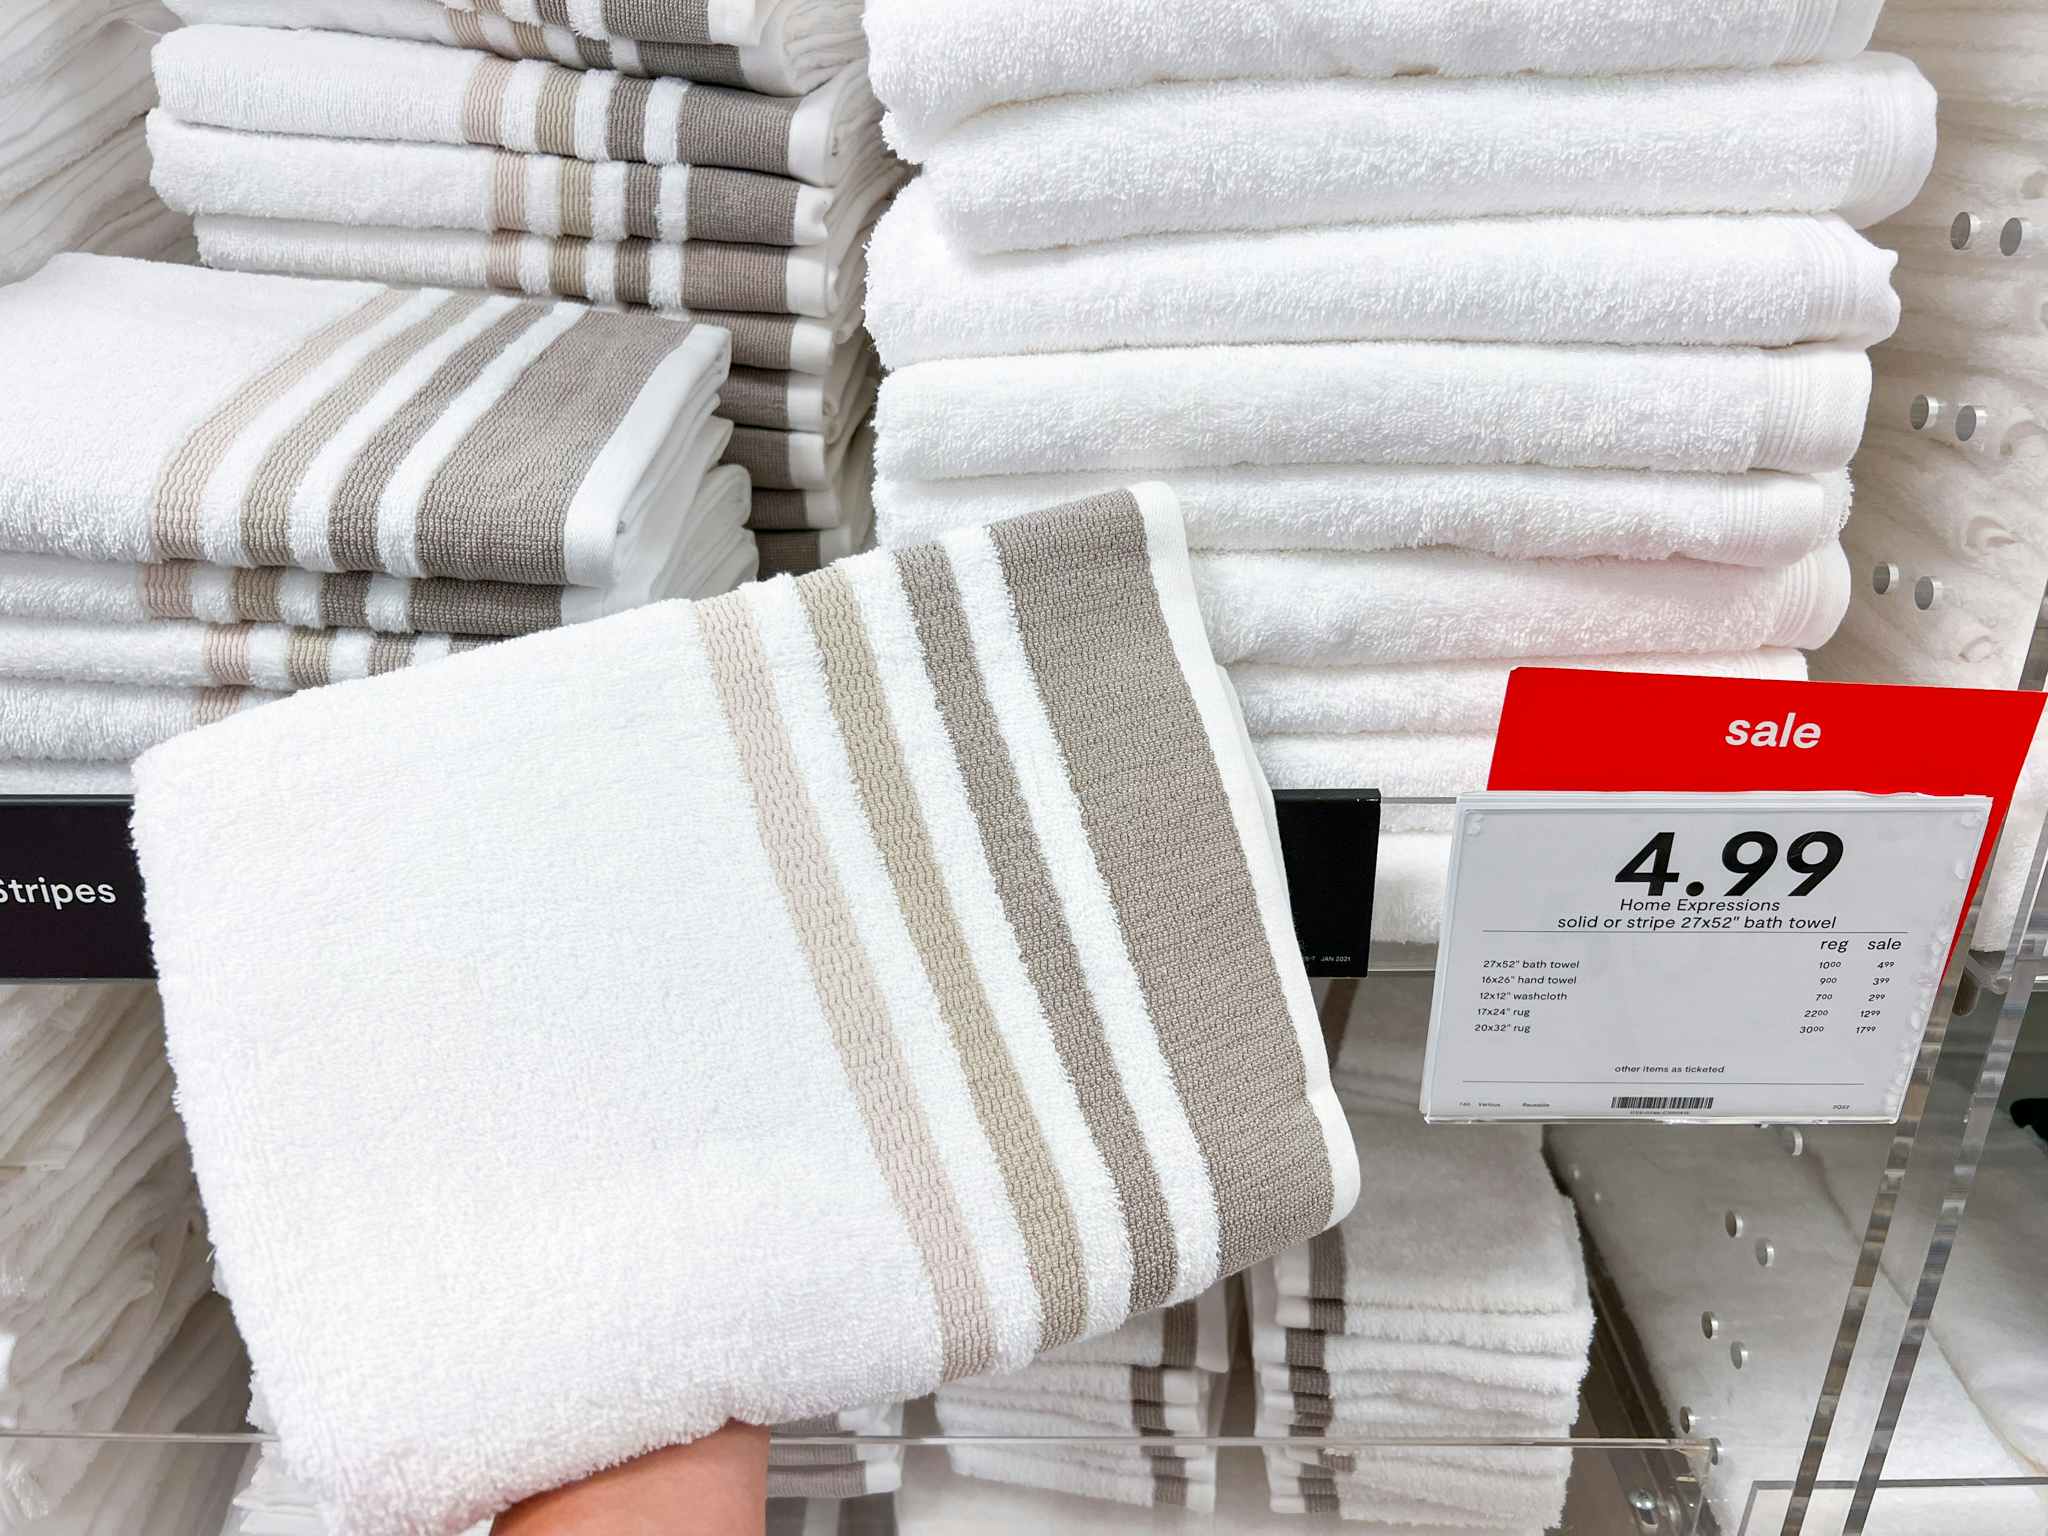 Home Expressions Towels on display next to a sale sign at JCPenney